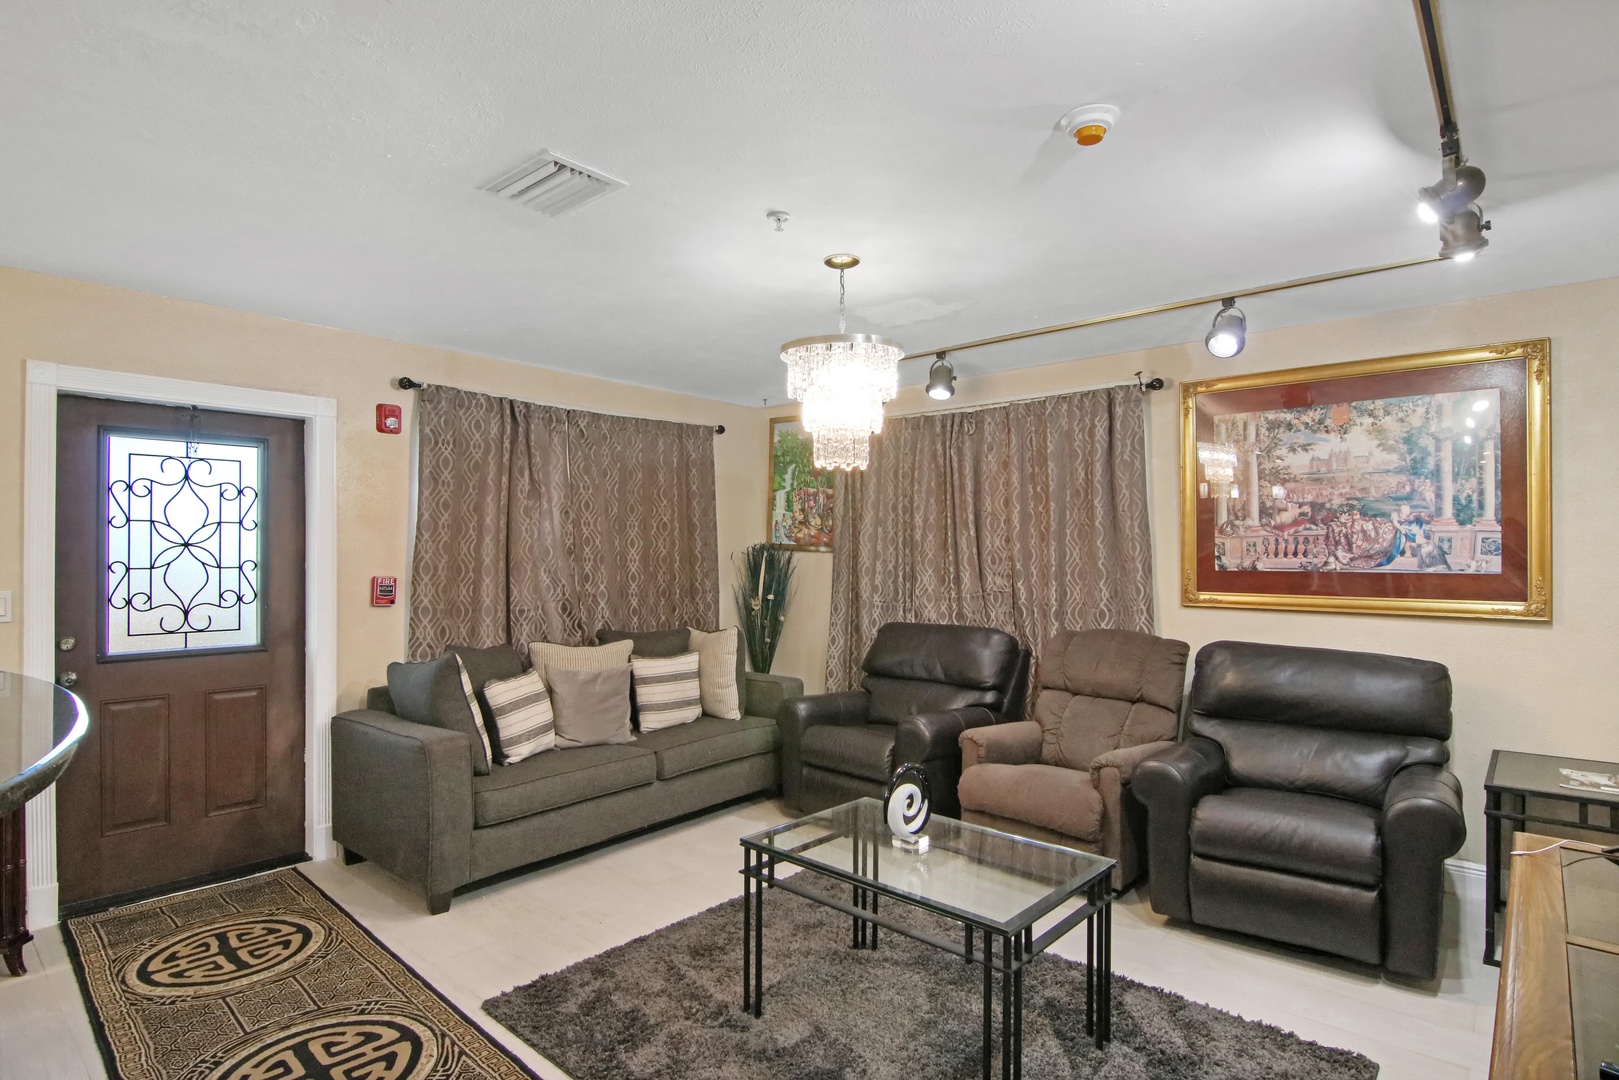 Cozy and spacious living area with ample seating for friends and family